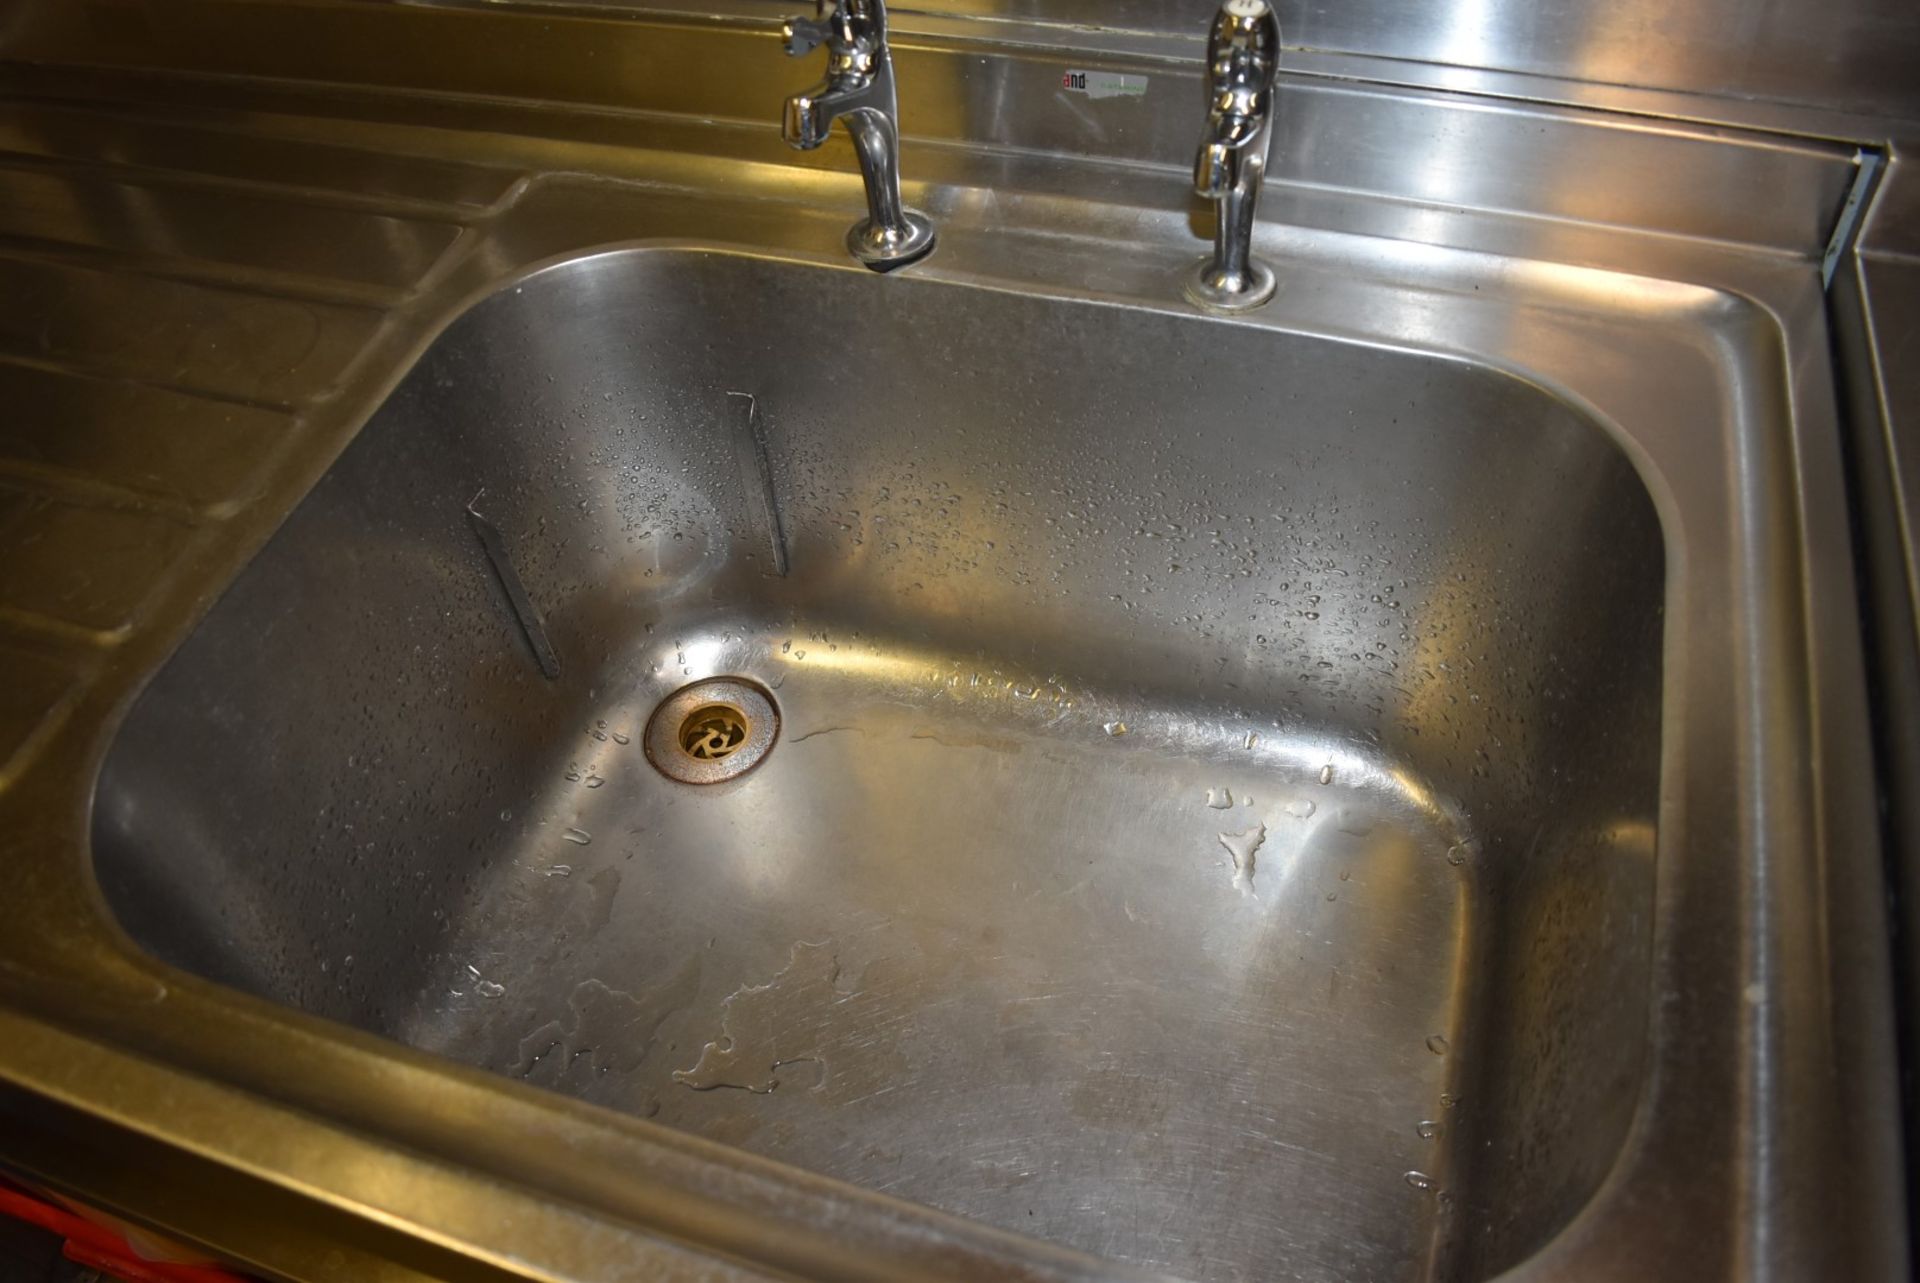 1 x Stainless Steel Wash Basin With Anti Drip Drainer, Undershelf and Mixer Taps - H87 x W120 x - Image 3 of 4